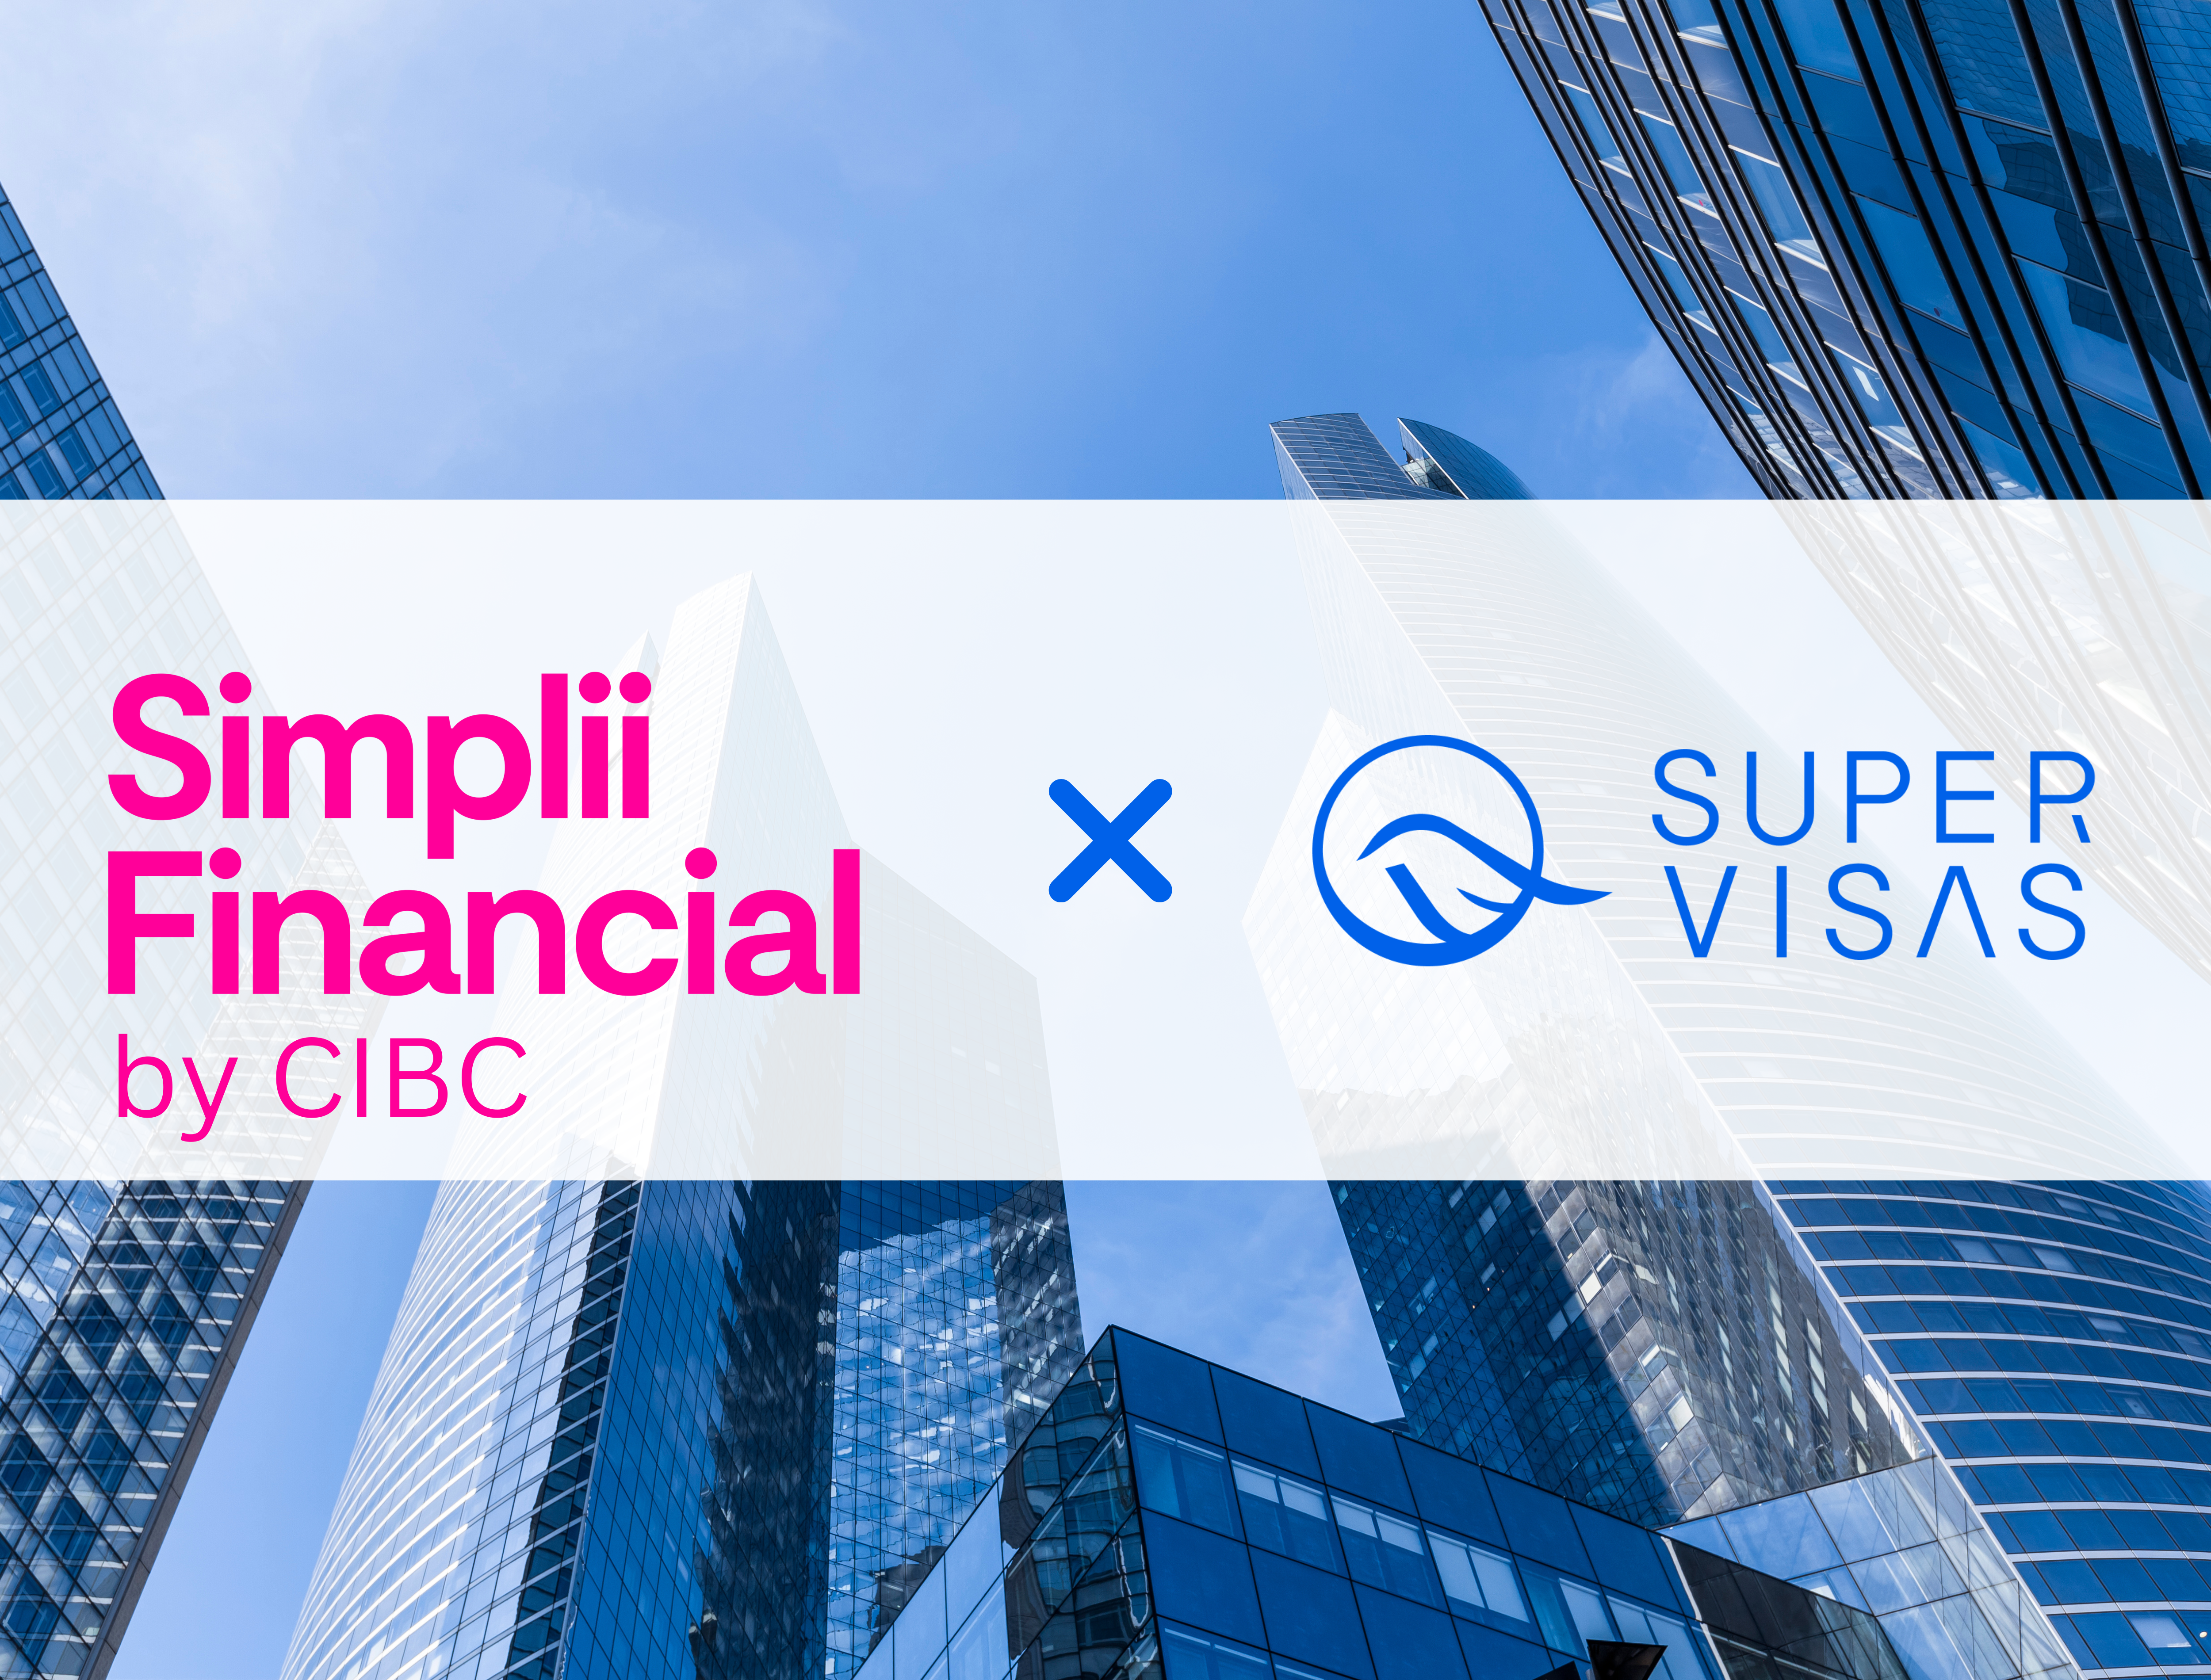 Introducing CIBC’s Simplii Financial - A Better Banking Experience for Newcomers